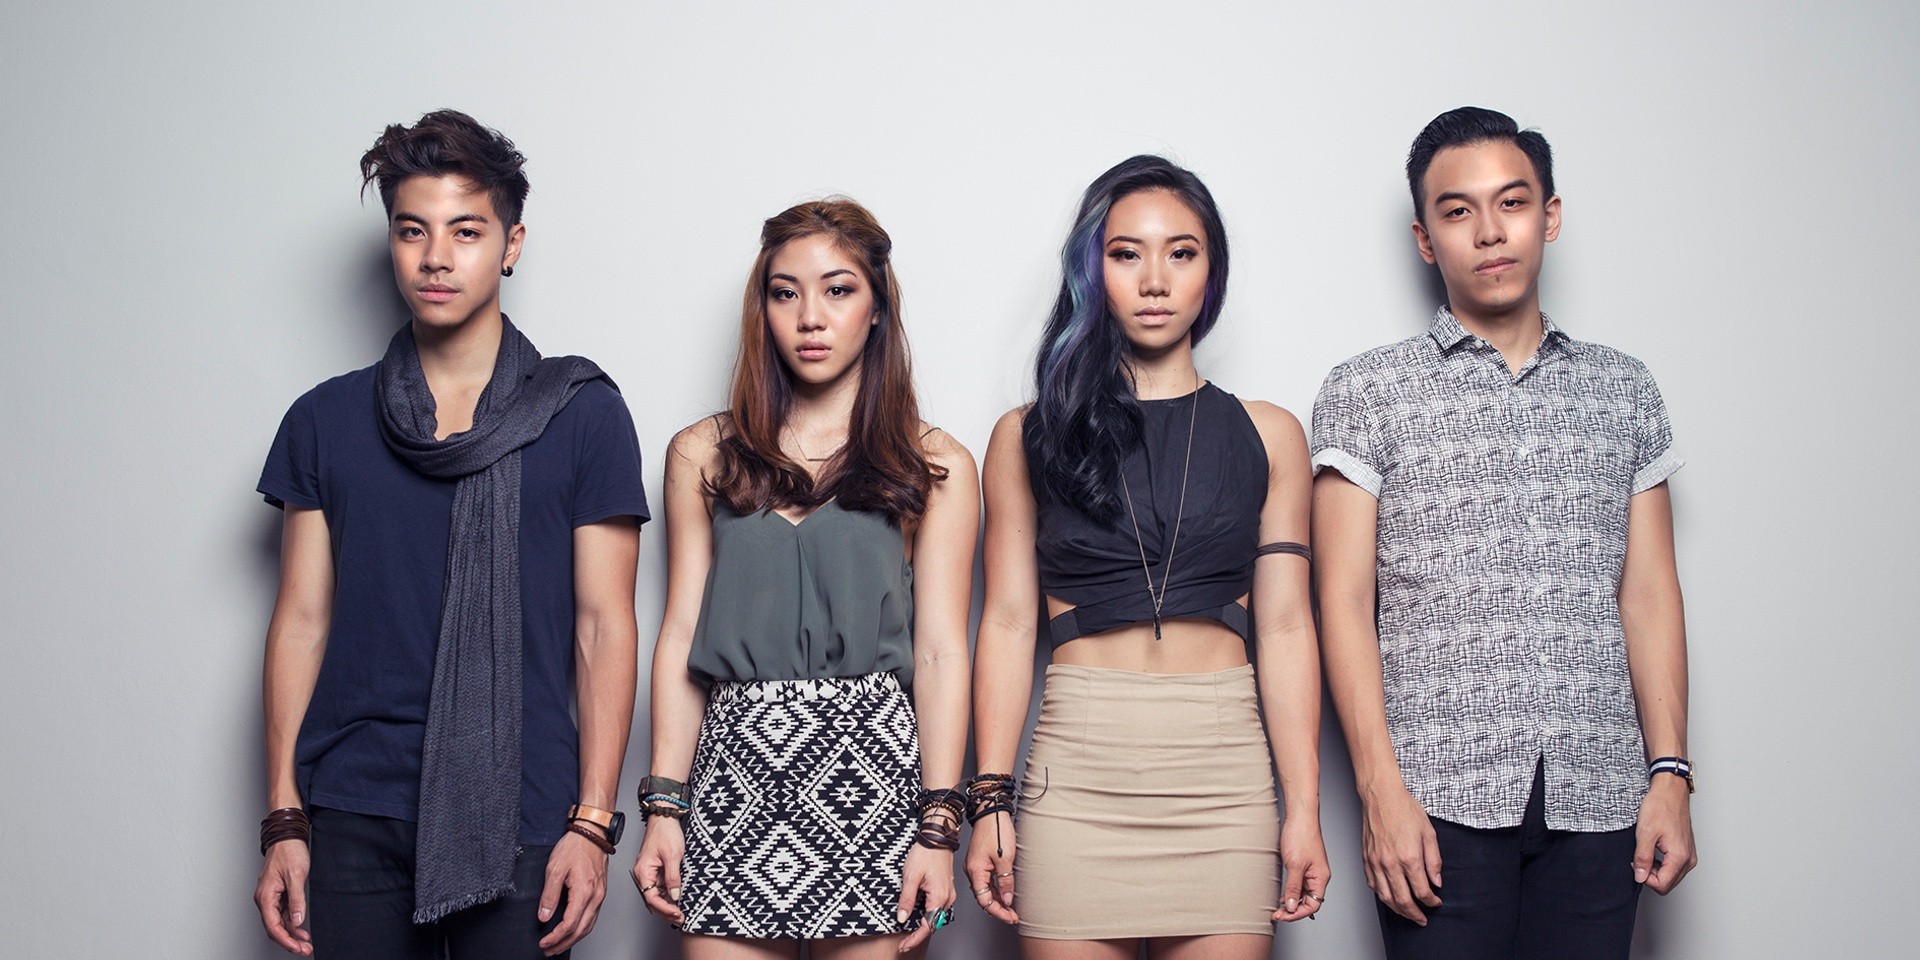 The Sam Willows to perform headlining show at The Coliseum